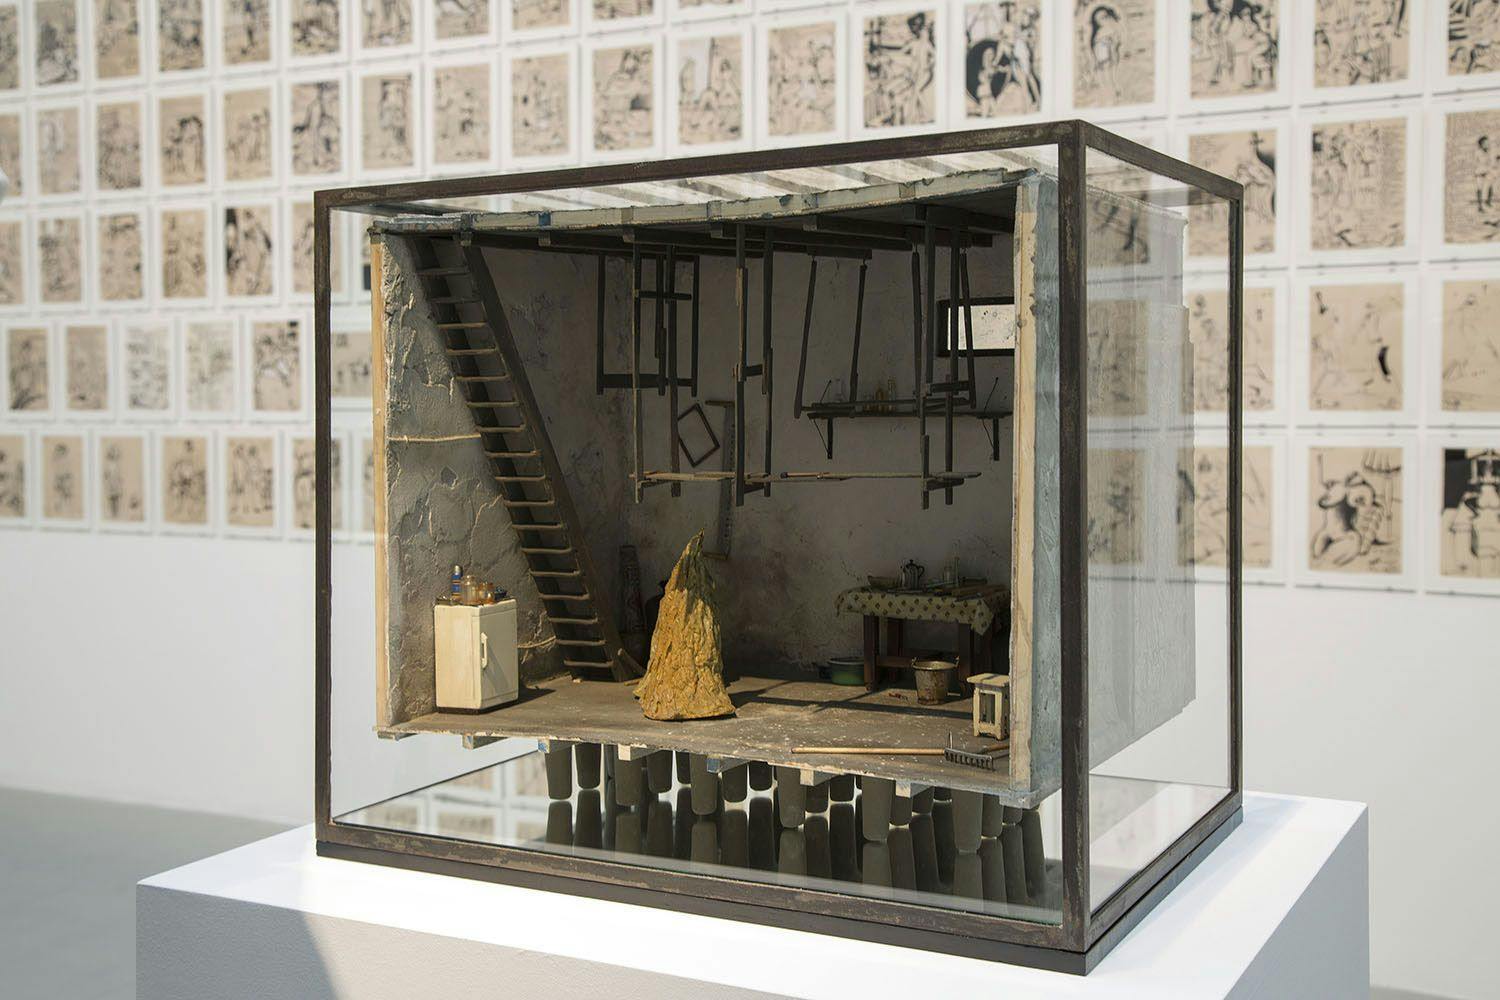 Installation view, Andra Ursuta: The Encyclopedic Palace, at the 55th Venice Biennale, dated 2013.